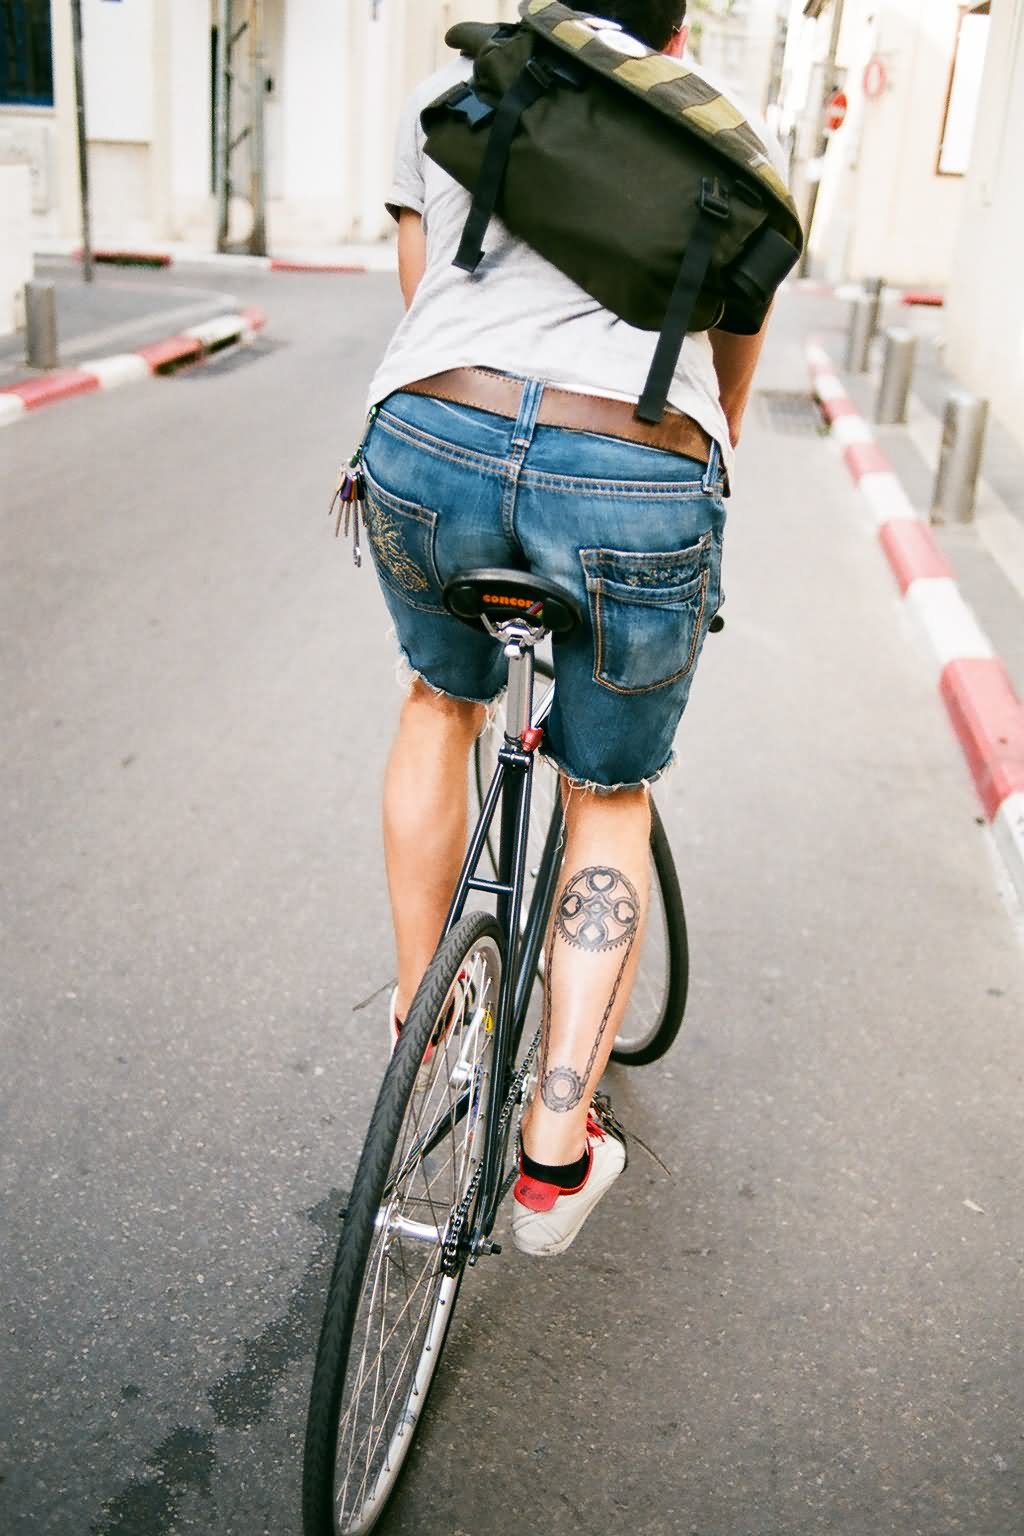 Two Bike Gears With Chain Tattoo On Right Leg